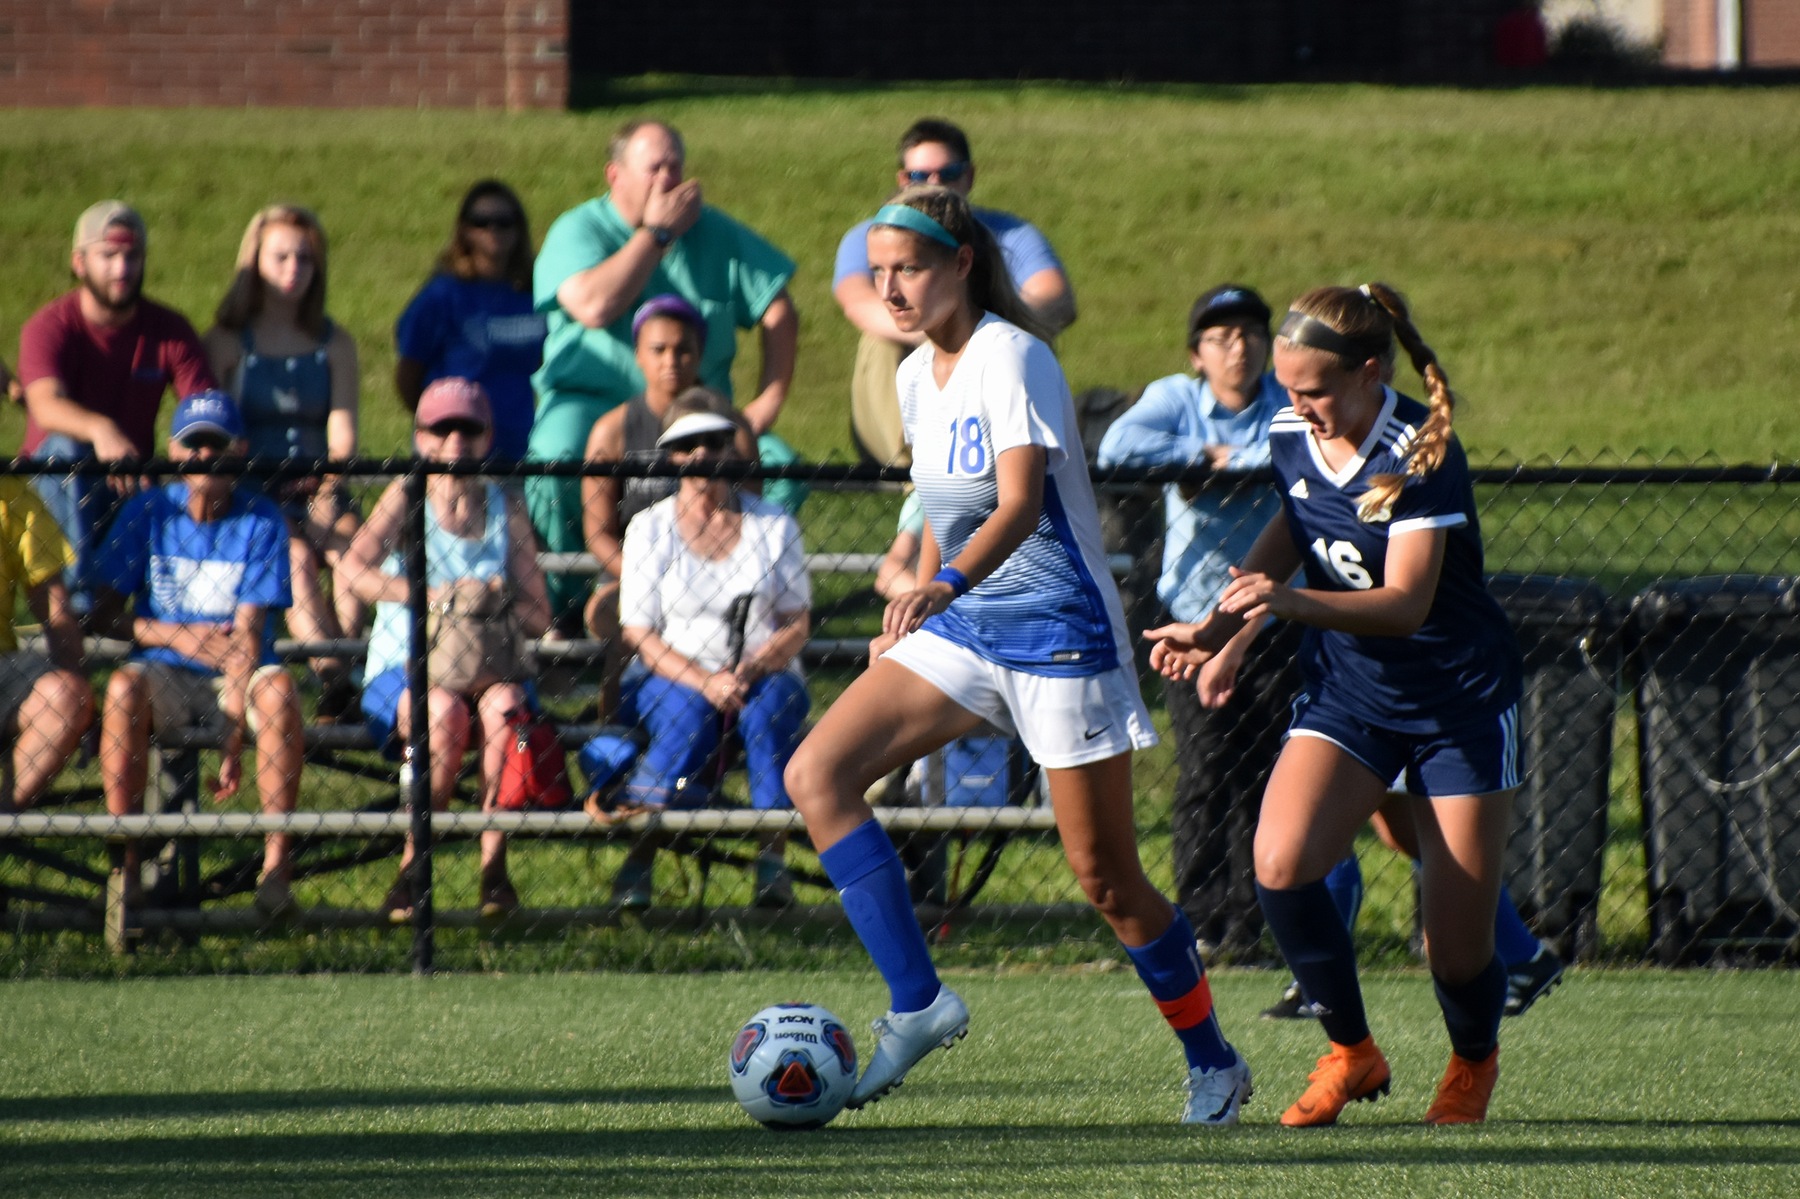 Hughes drives home a pair of goals as Brevard storms past Guilford, 2-1